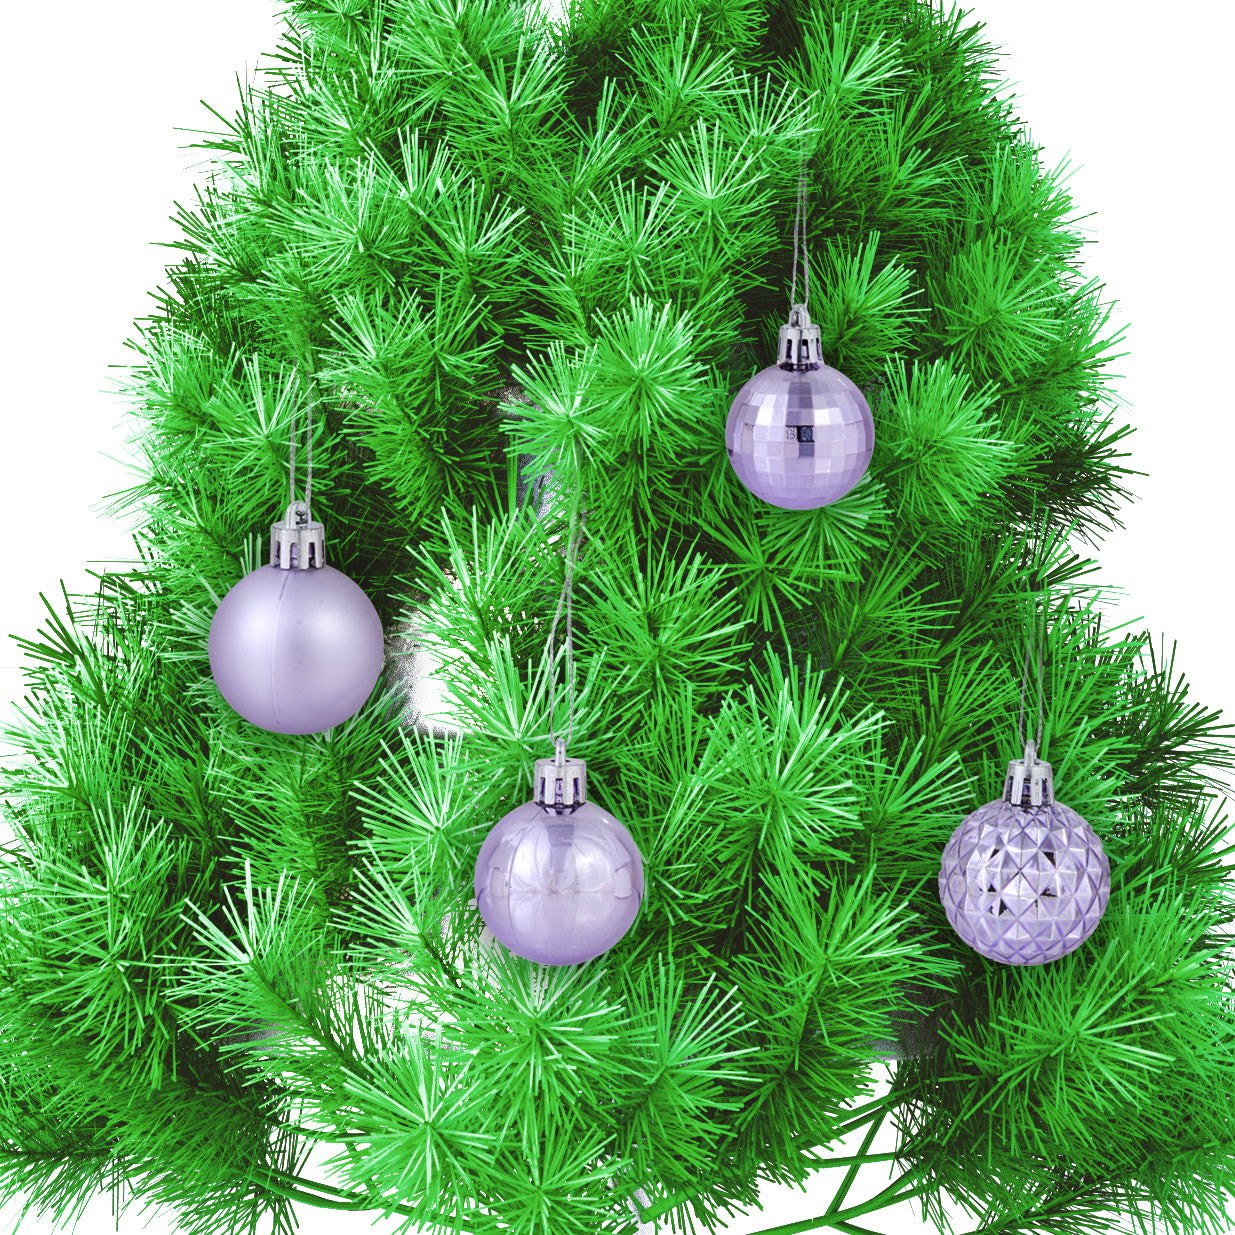 Christmas Baubles Lilac 40Mm 24Pc Acetate